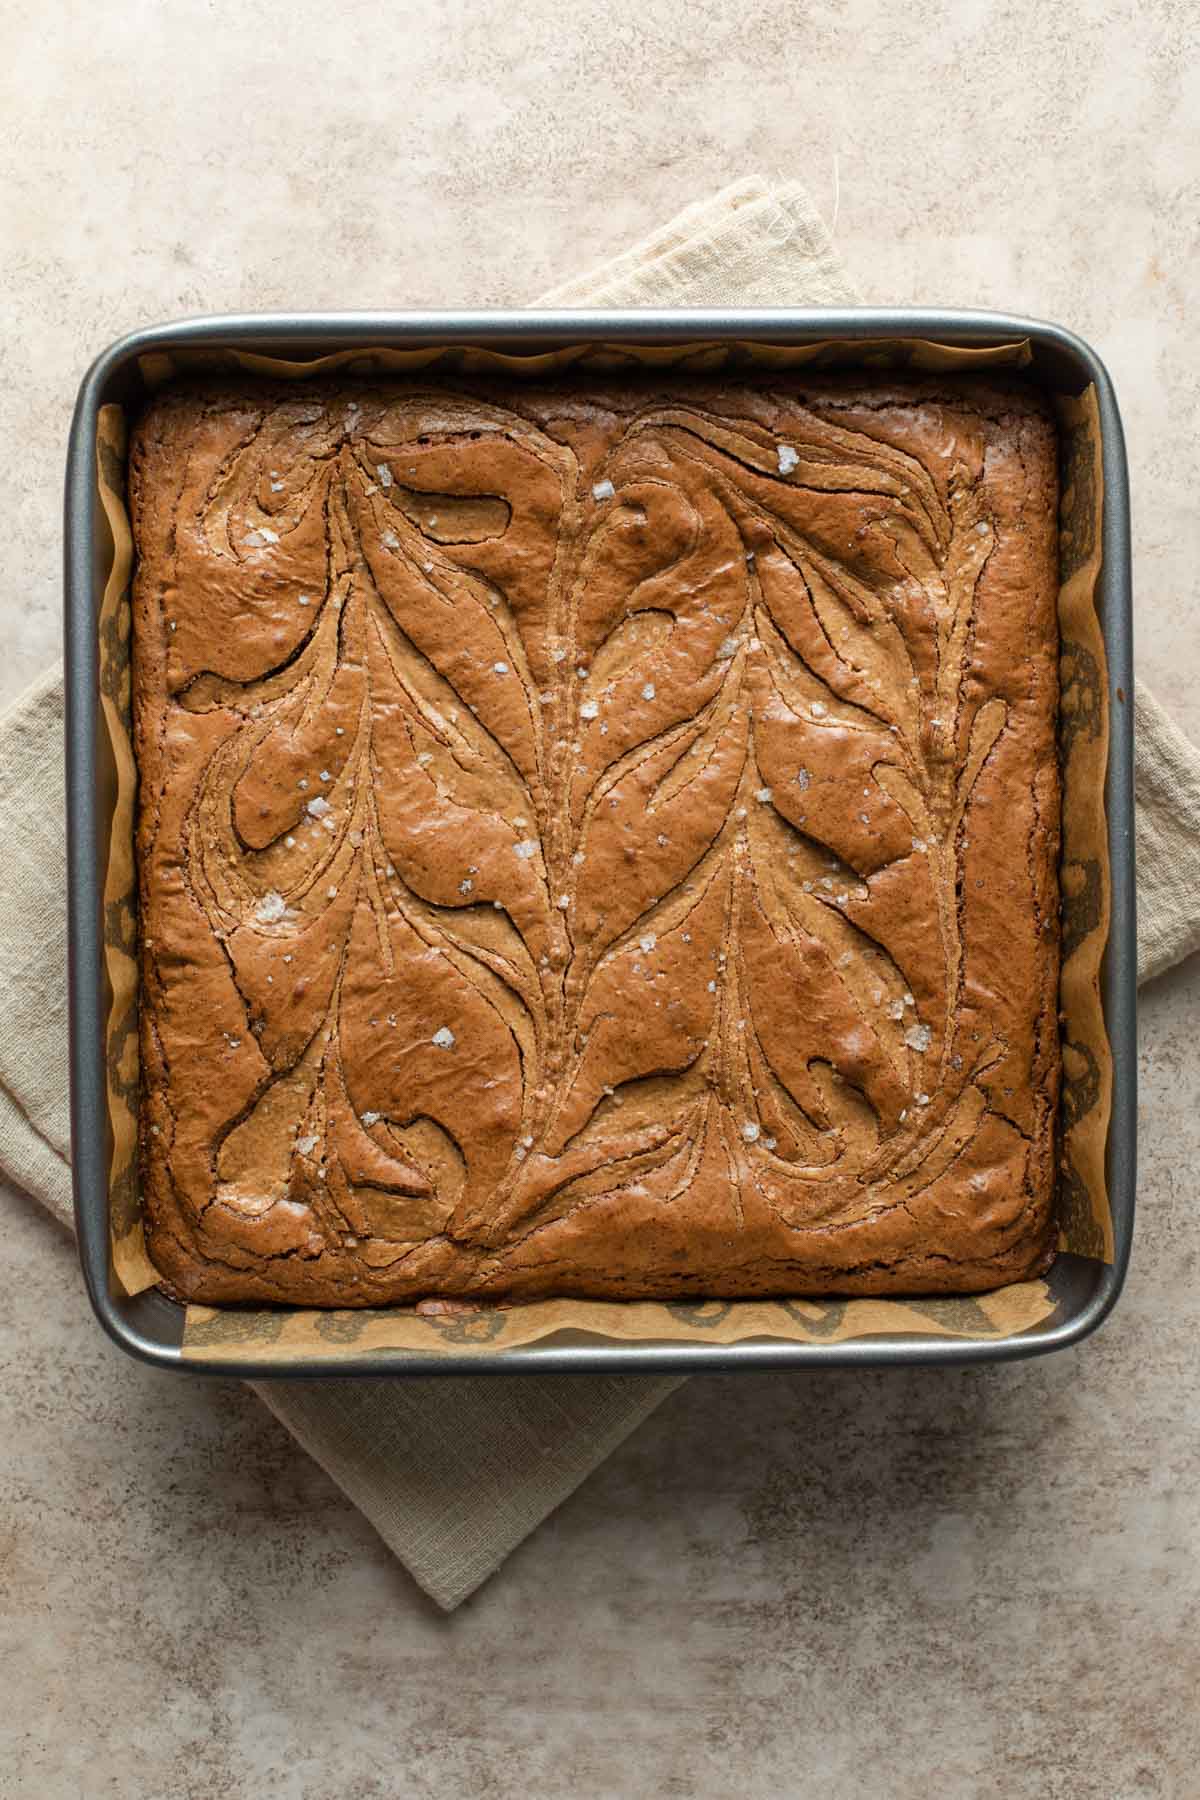 Almond butter brownies baked up in a square pan.